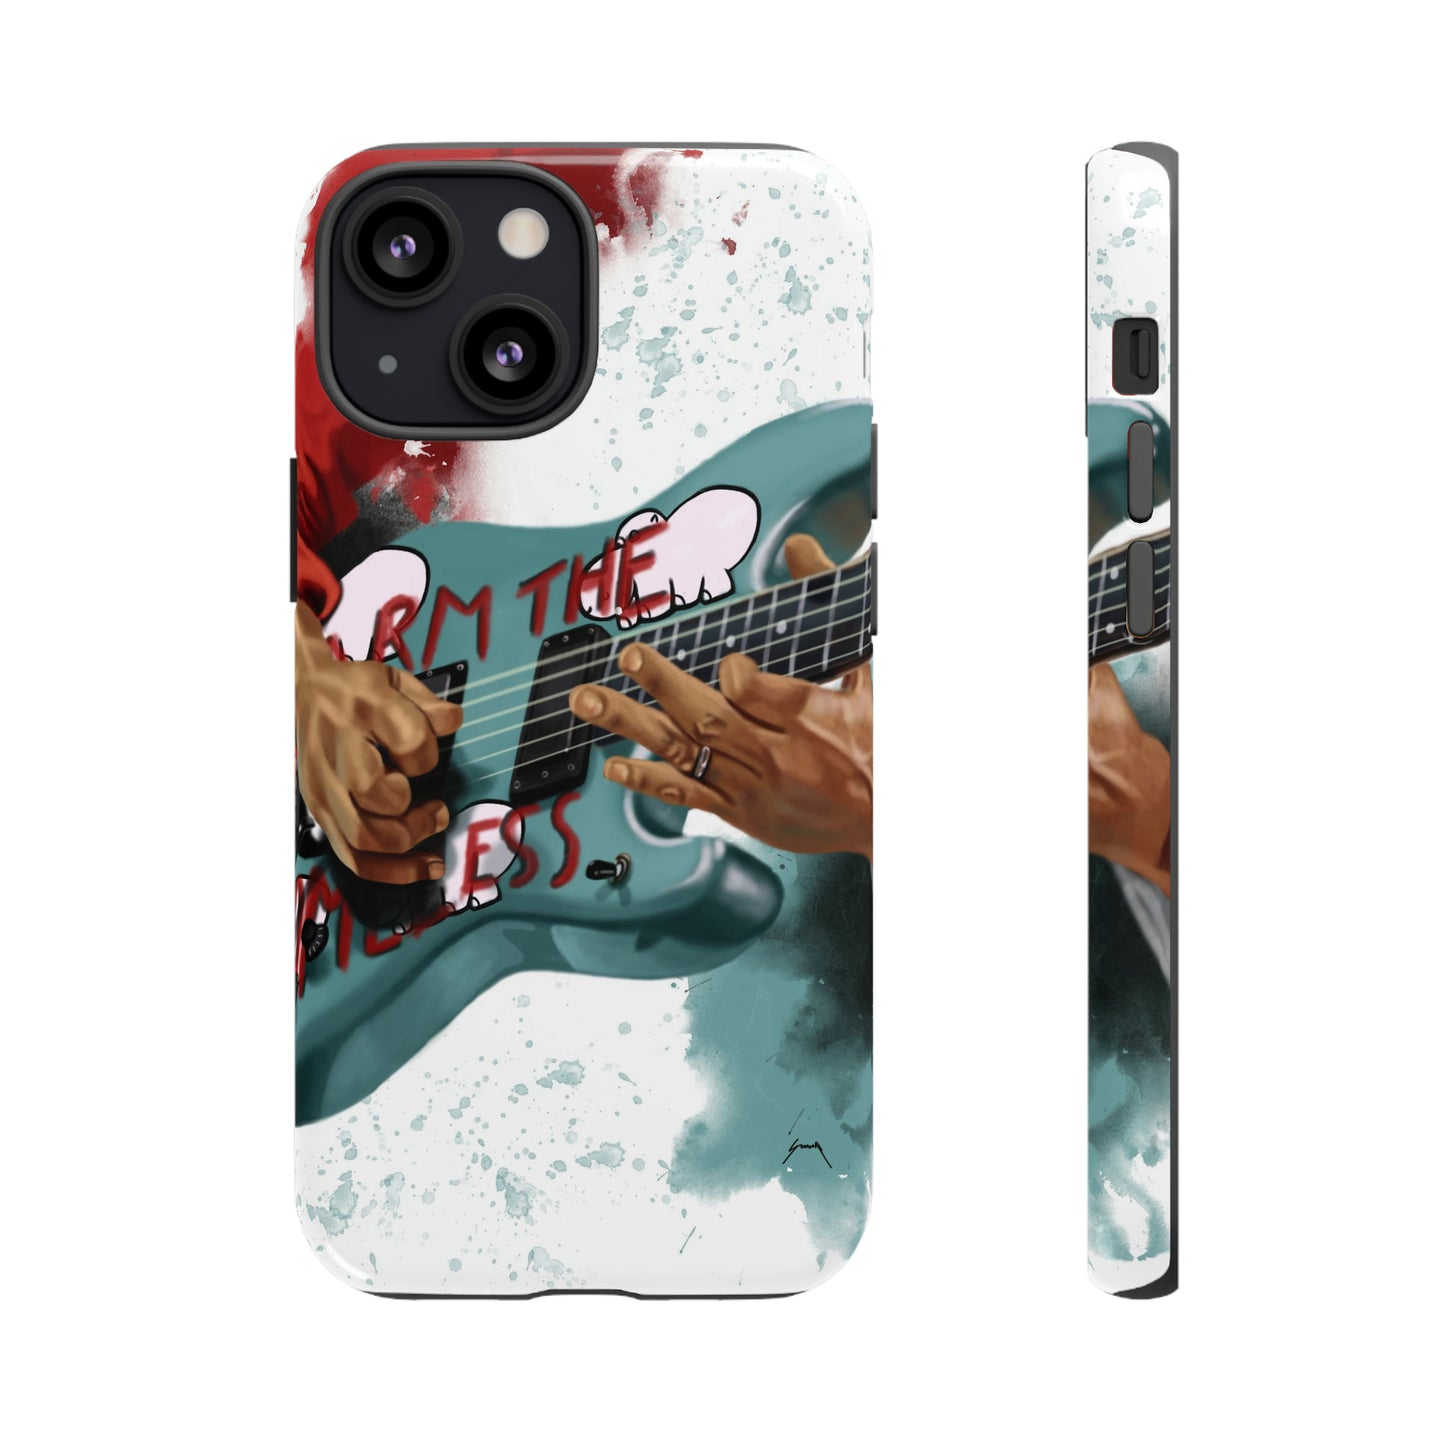 Digital painting of a blue electric guitar with stickers and hands printed on iphone phone case